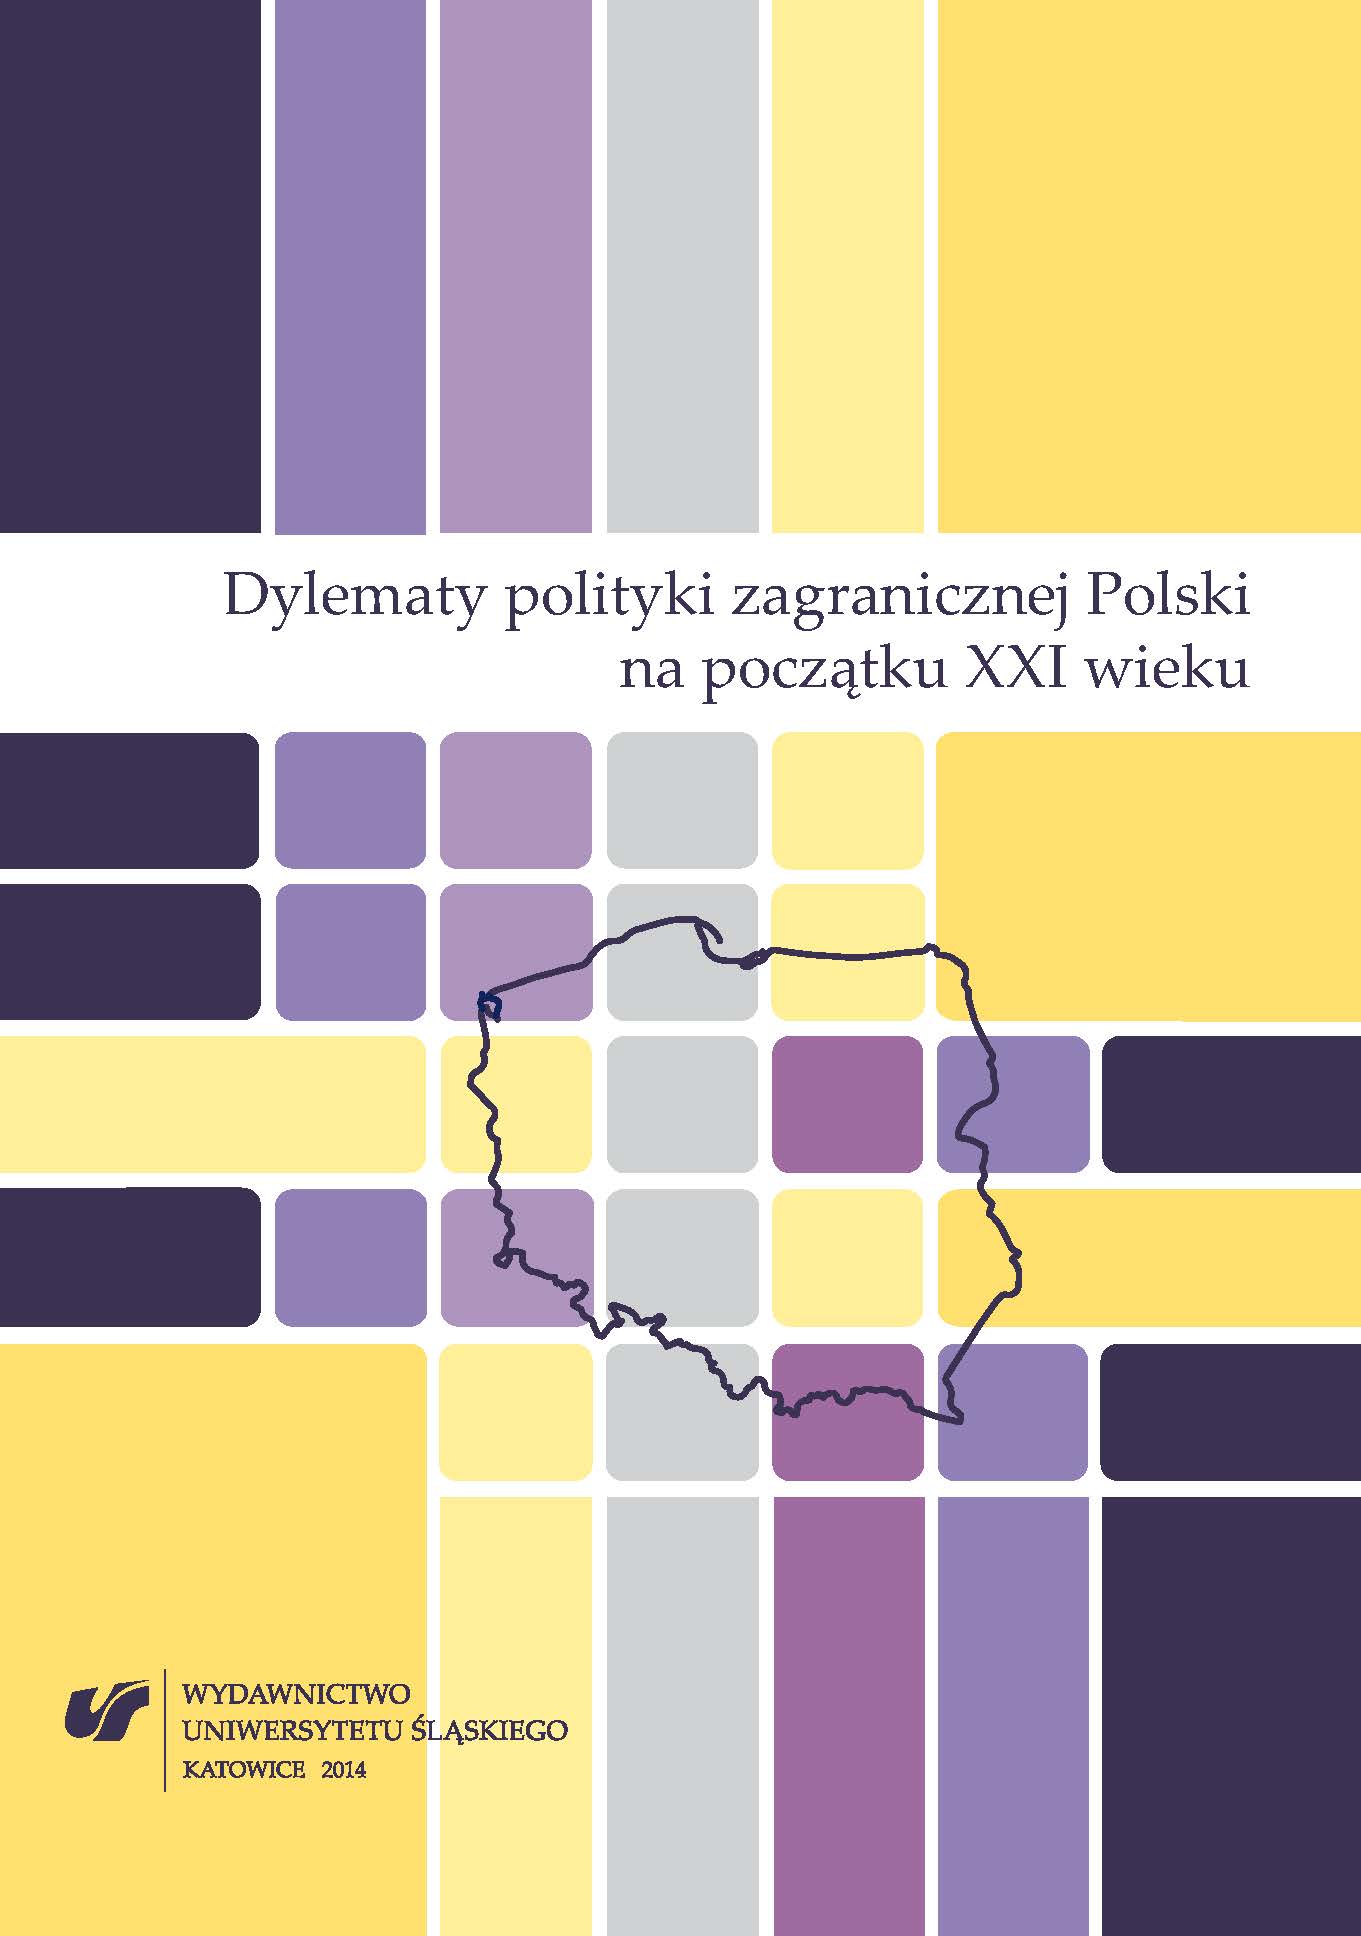 Dilemmas of Polish Foreign Policy at the Beginning of 21st Century